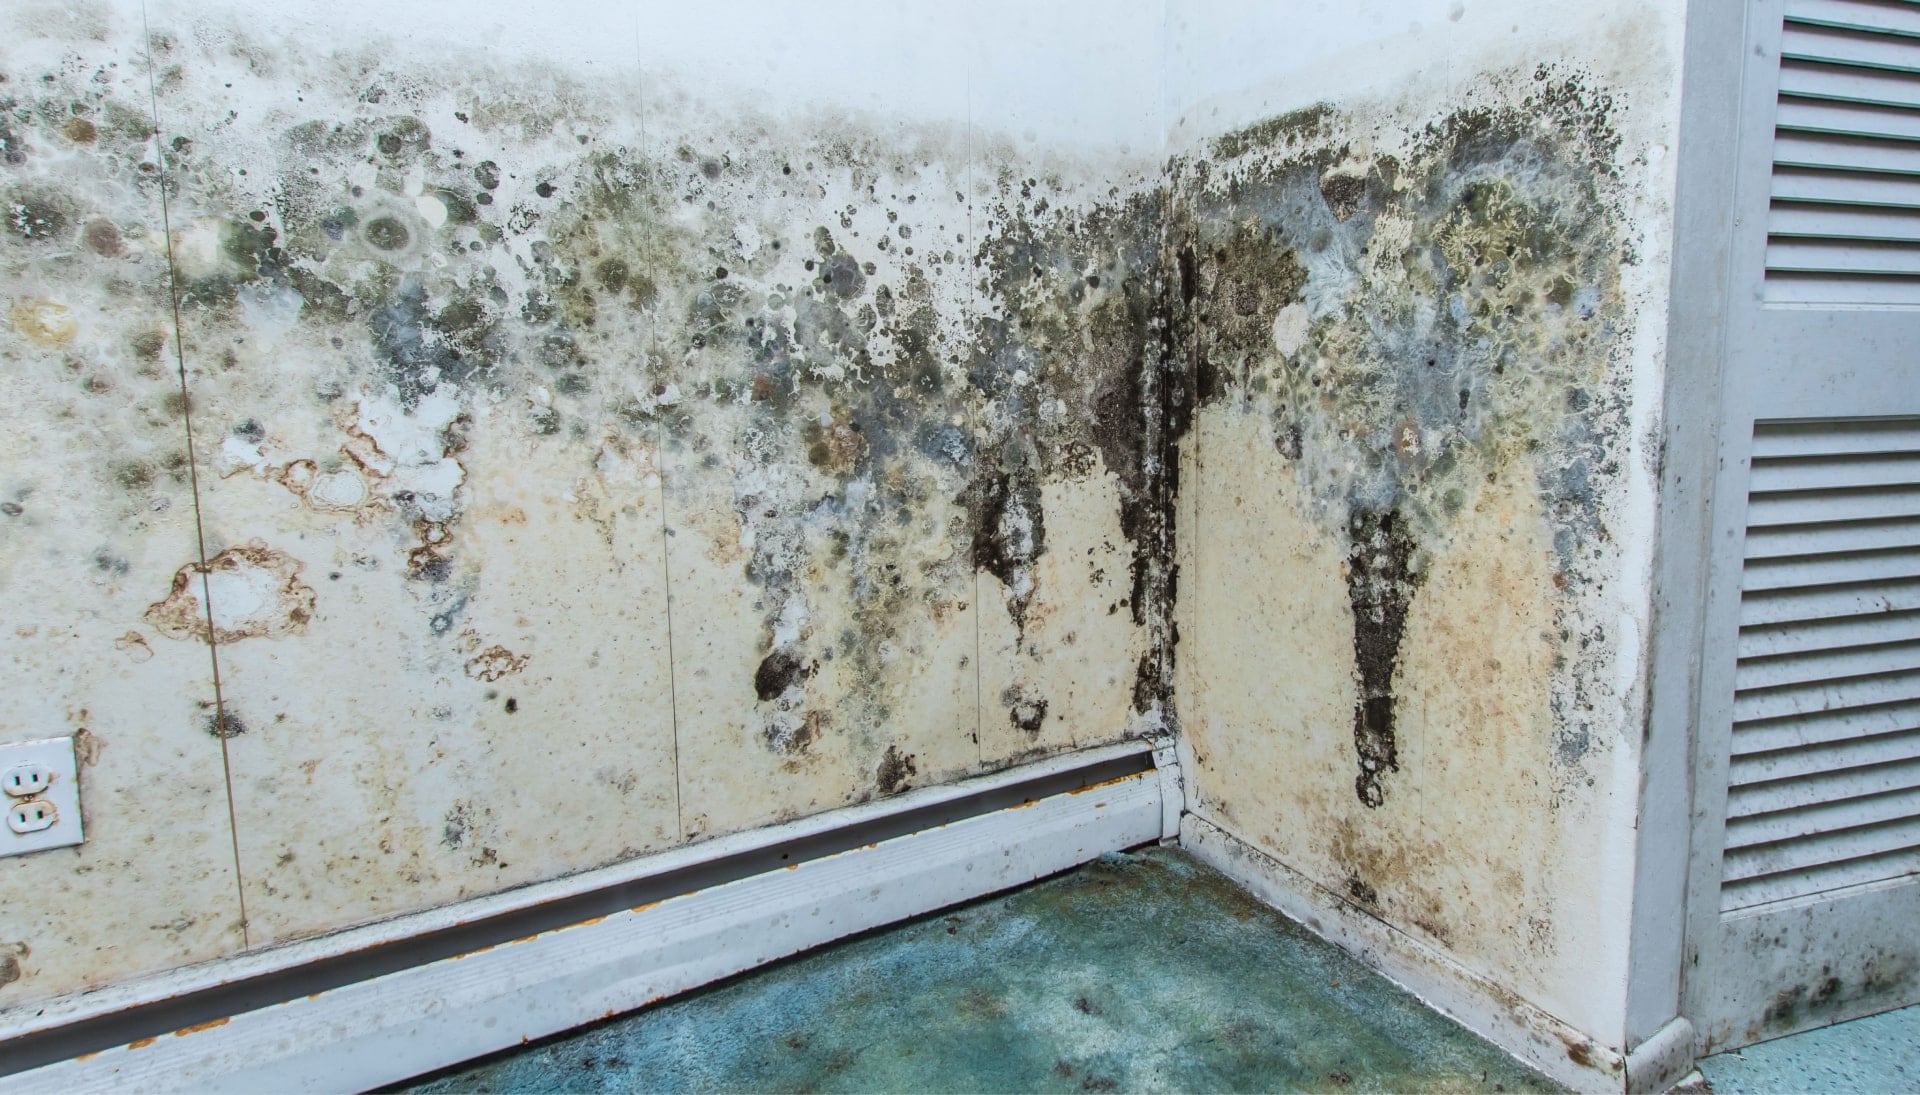 Professional mold removal, odor control, and water damage restoration service in Buffalo, New York.